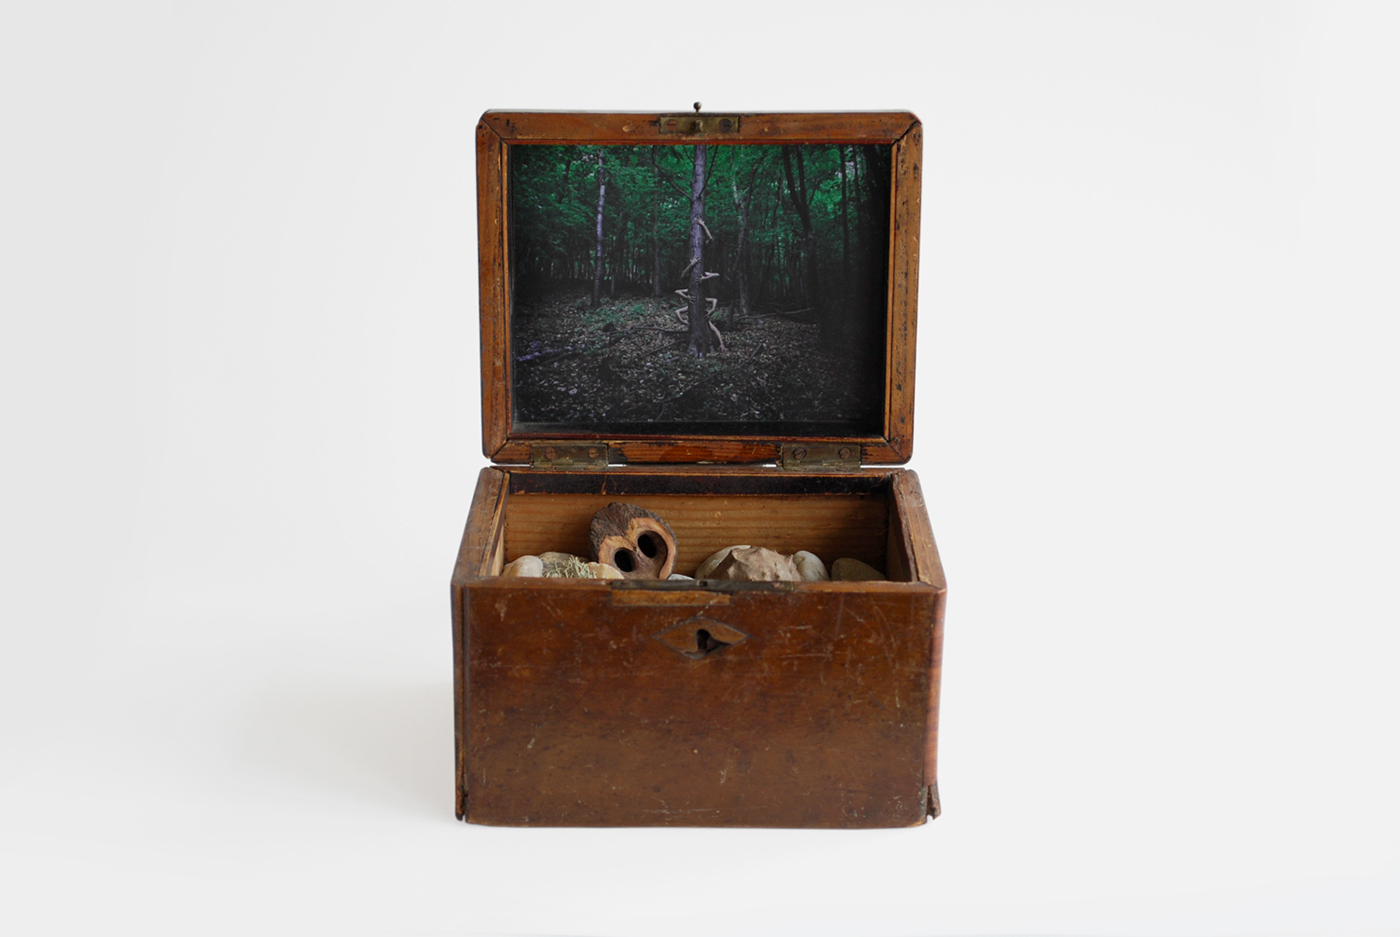 Photography  staged photo Wooden box concept art pandora's box box installation hands arms